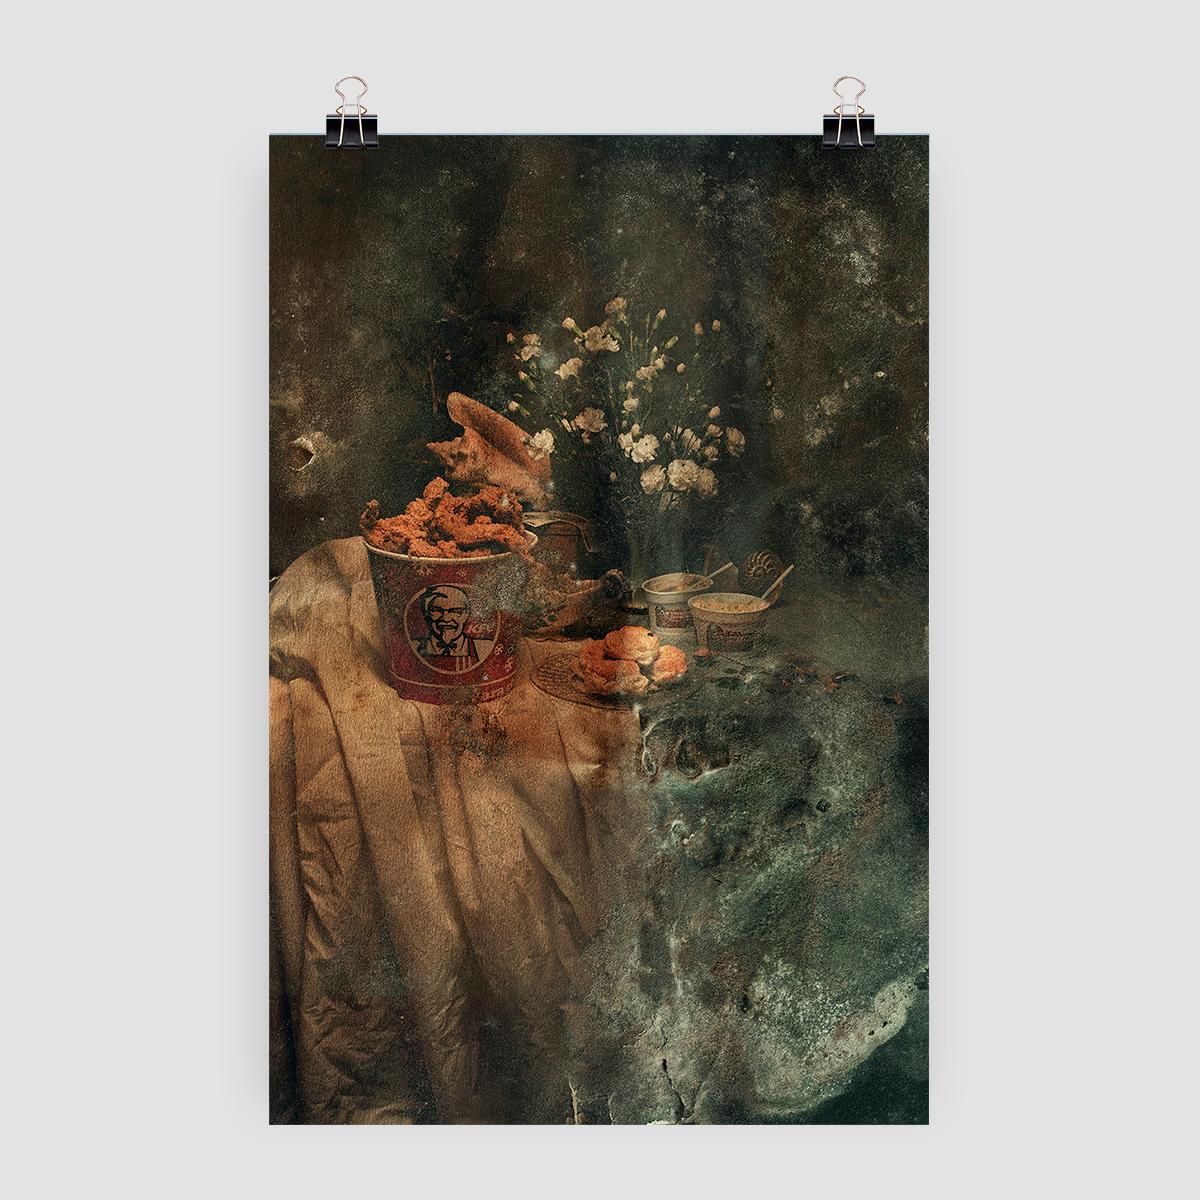 Aaron Alamo uses the typical visual elements of the Baroque Vanitas, adding some contemporary objects, but his message transcends a mere aesthetic, as he plays with our idea of photography and art as eternal elements. His work is a photograph of a